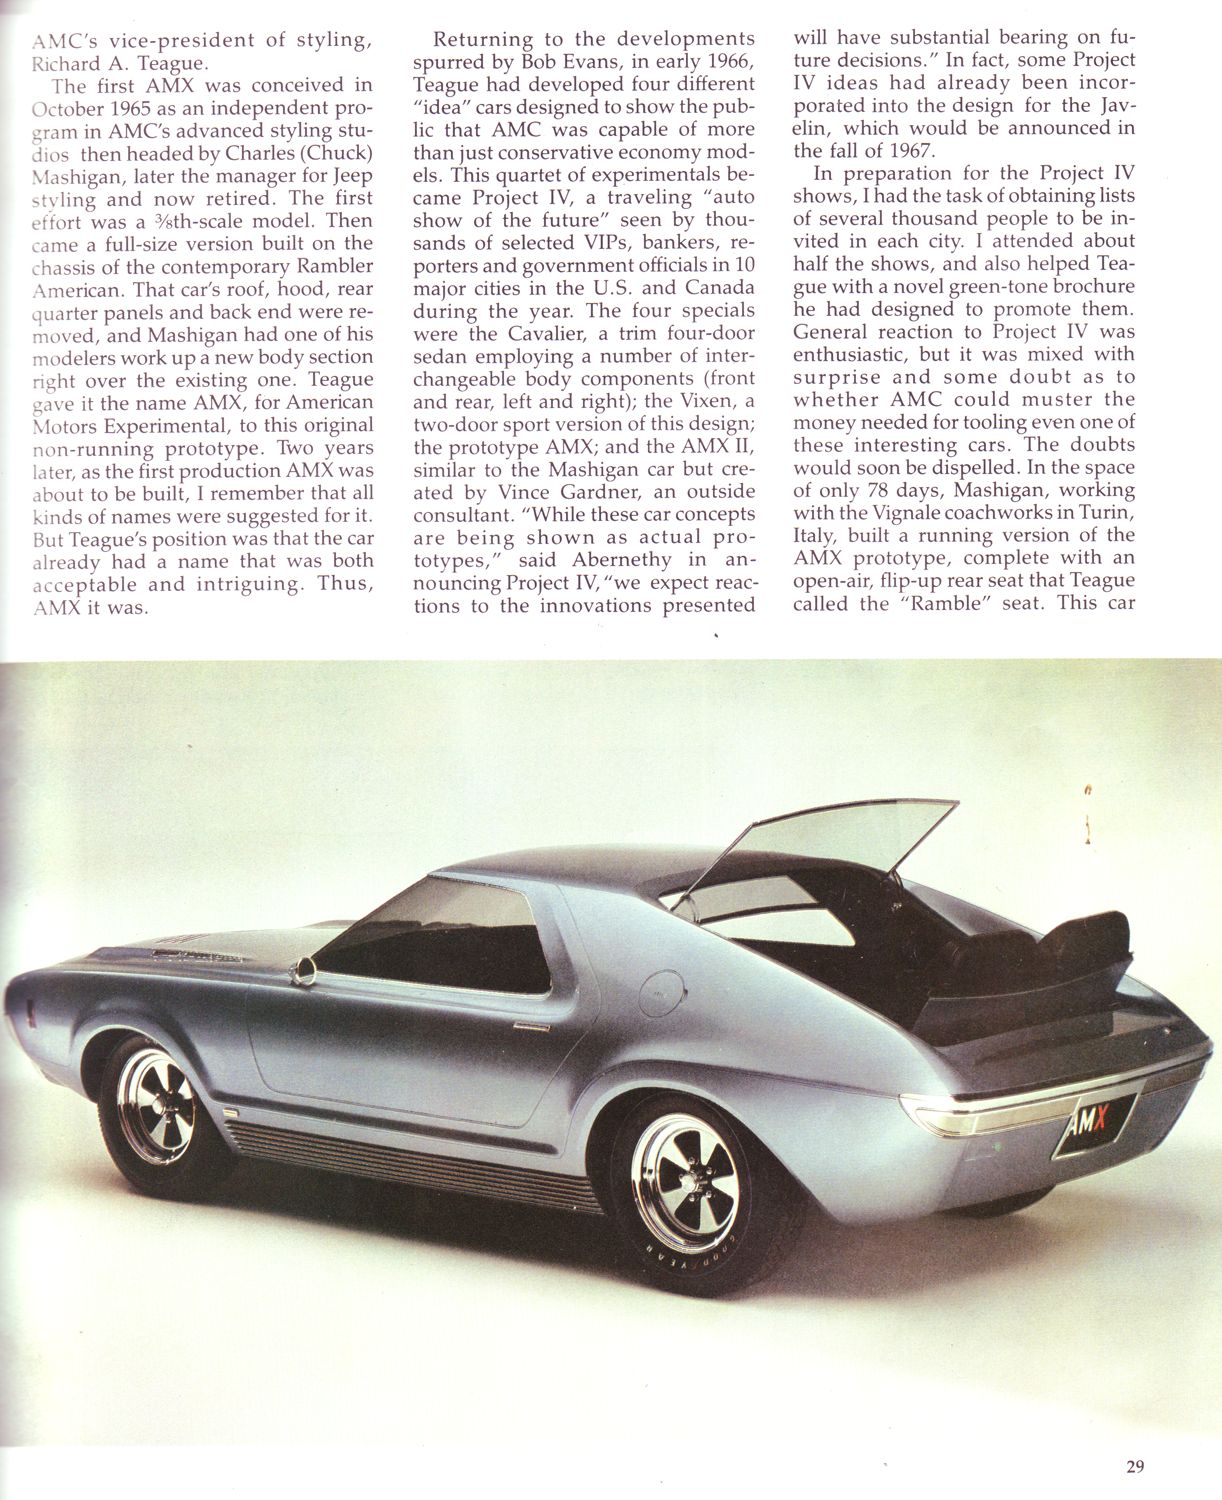 1984-07-collectibleautomobile-29-full